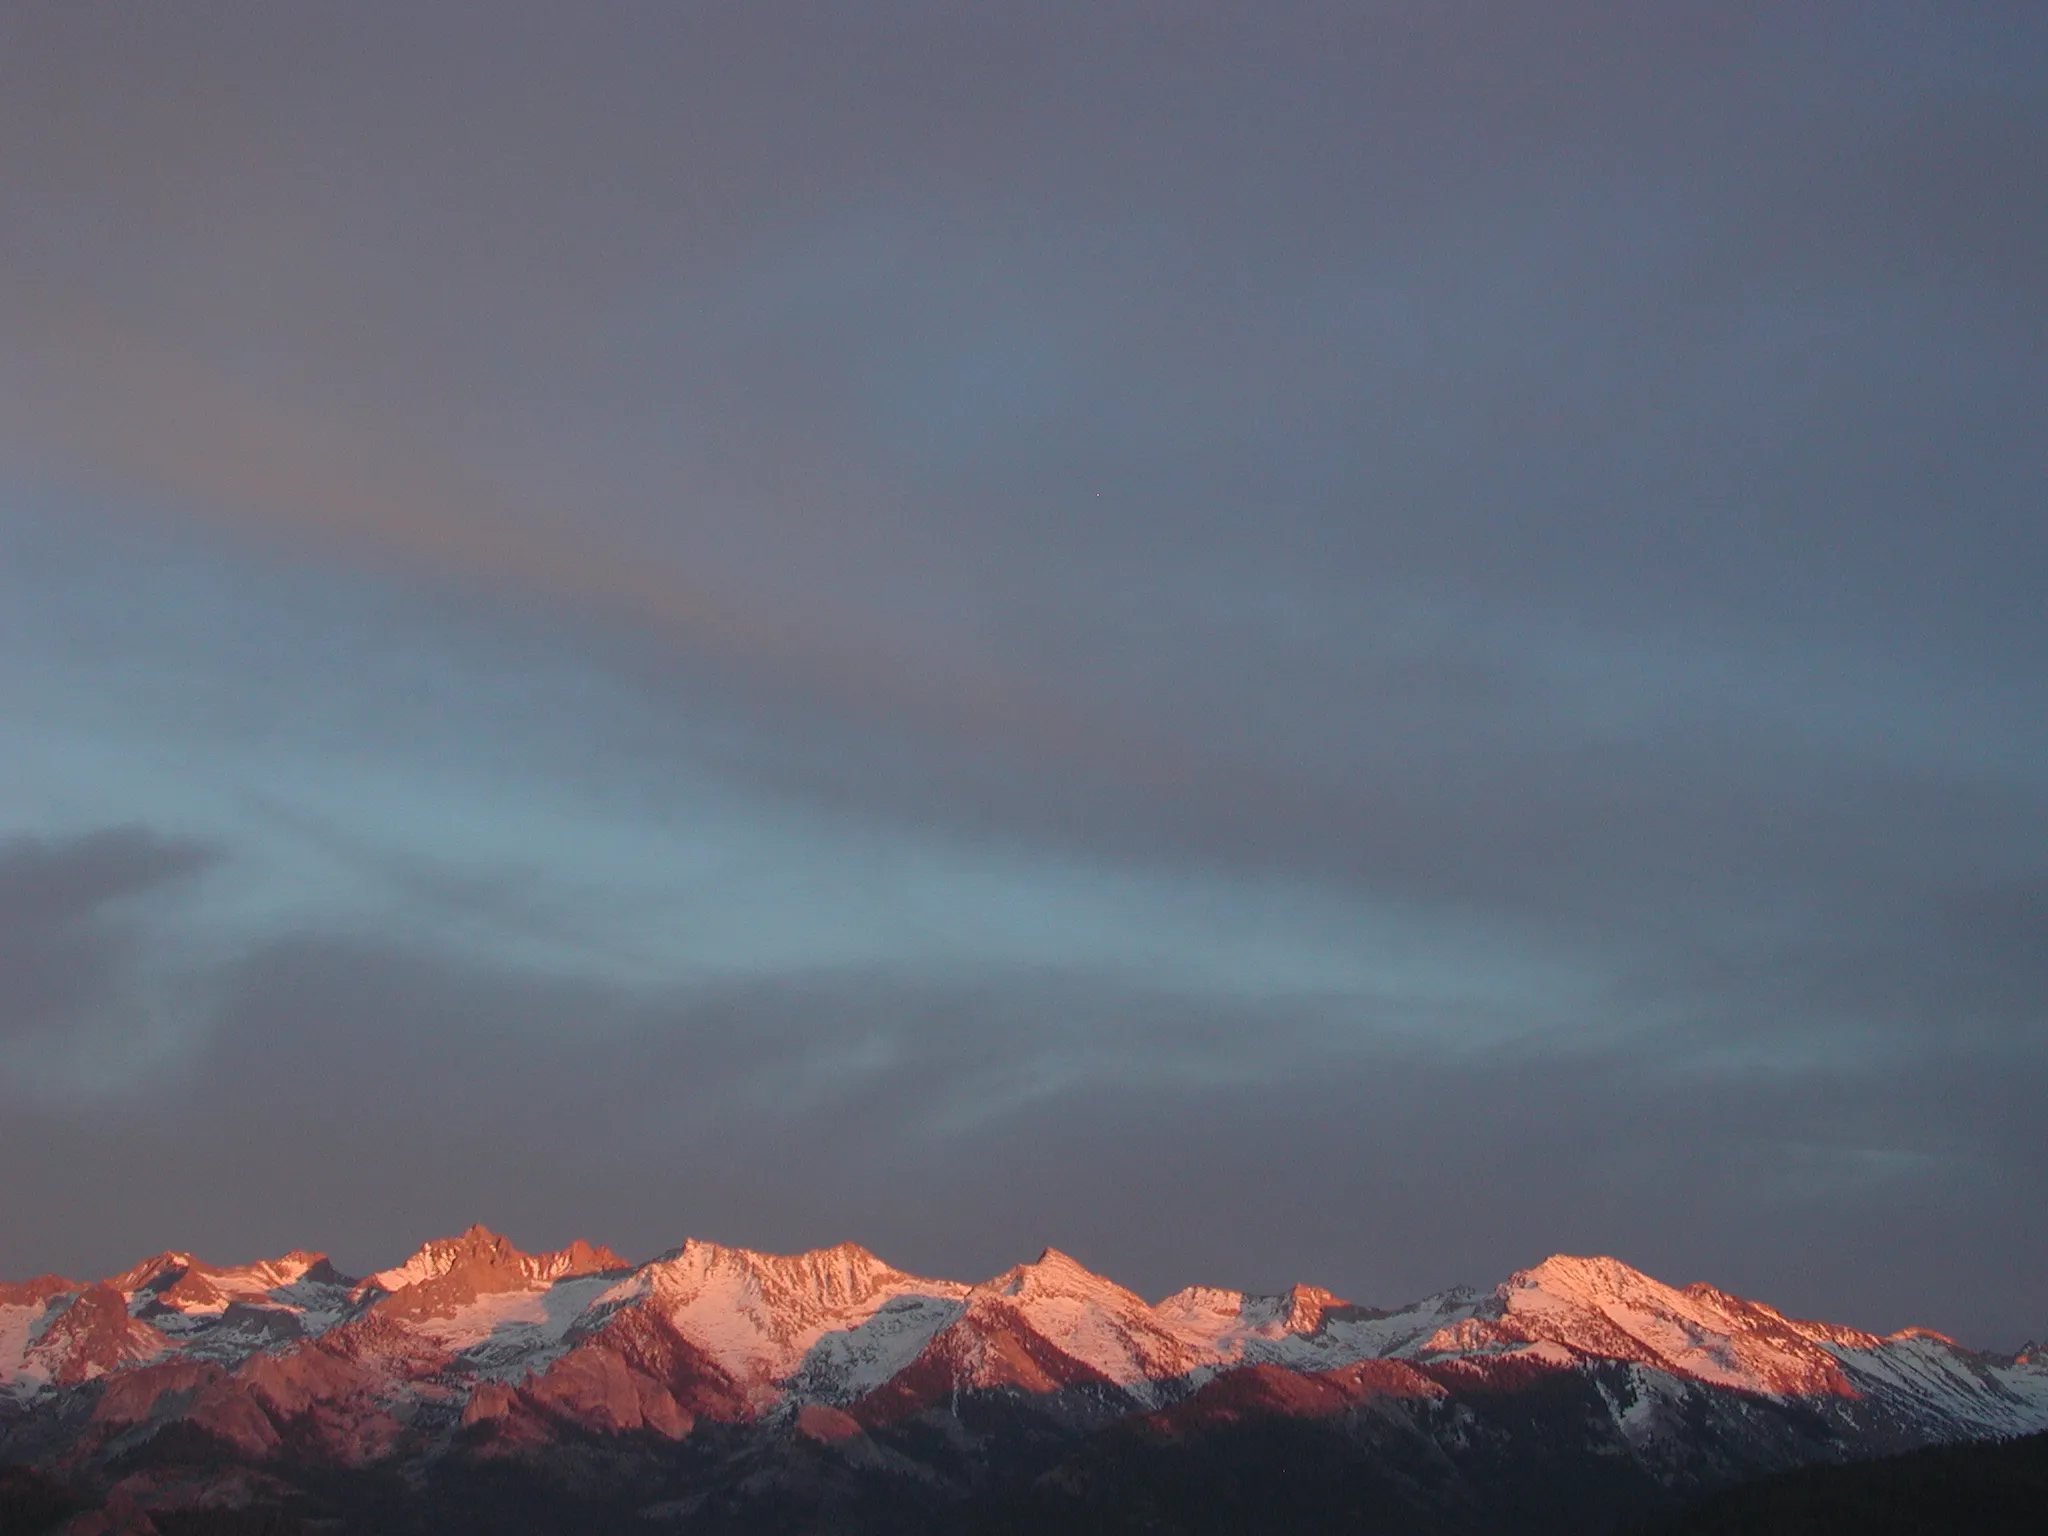 Sunset over a Sierra mountain range, sun just hitting the peaks against a bluegrey sky and mountainbase